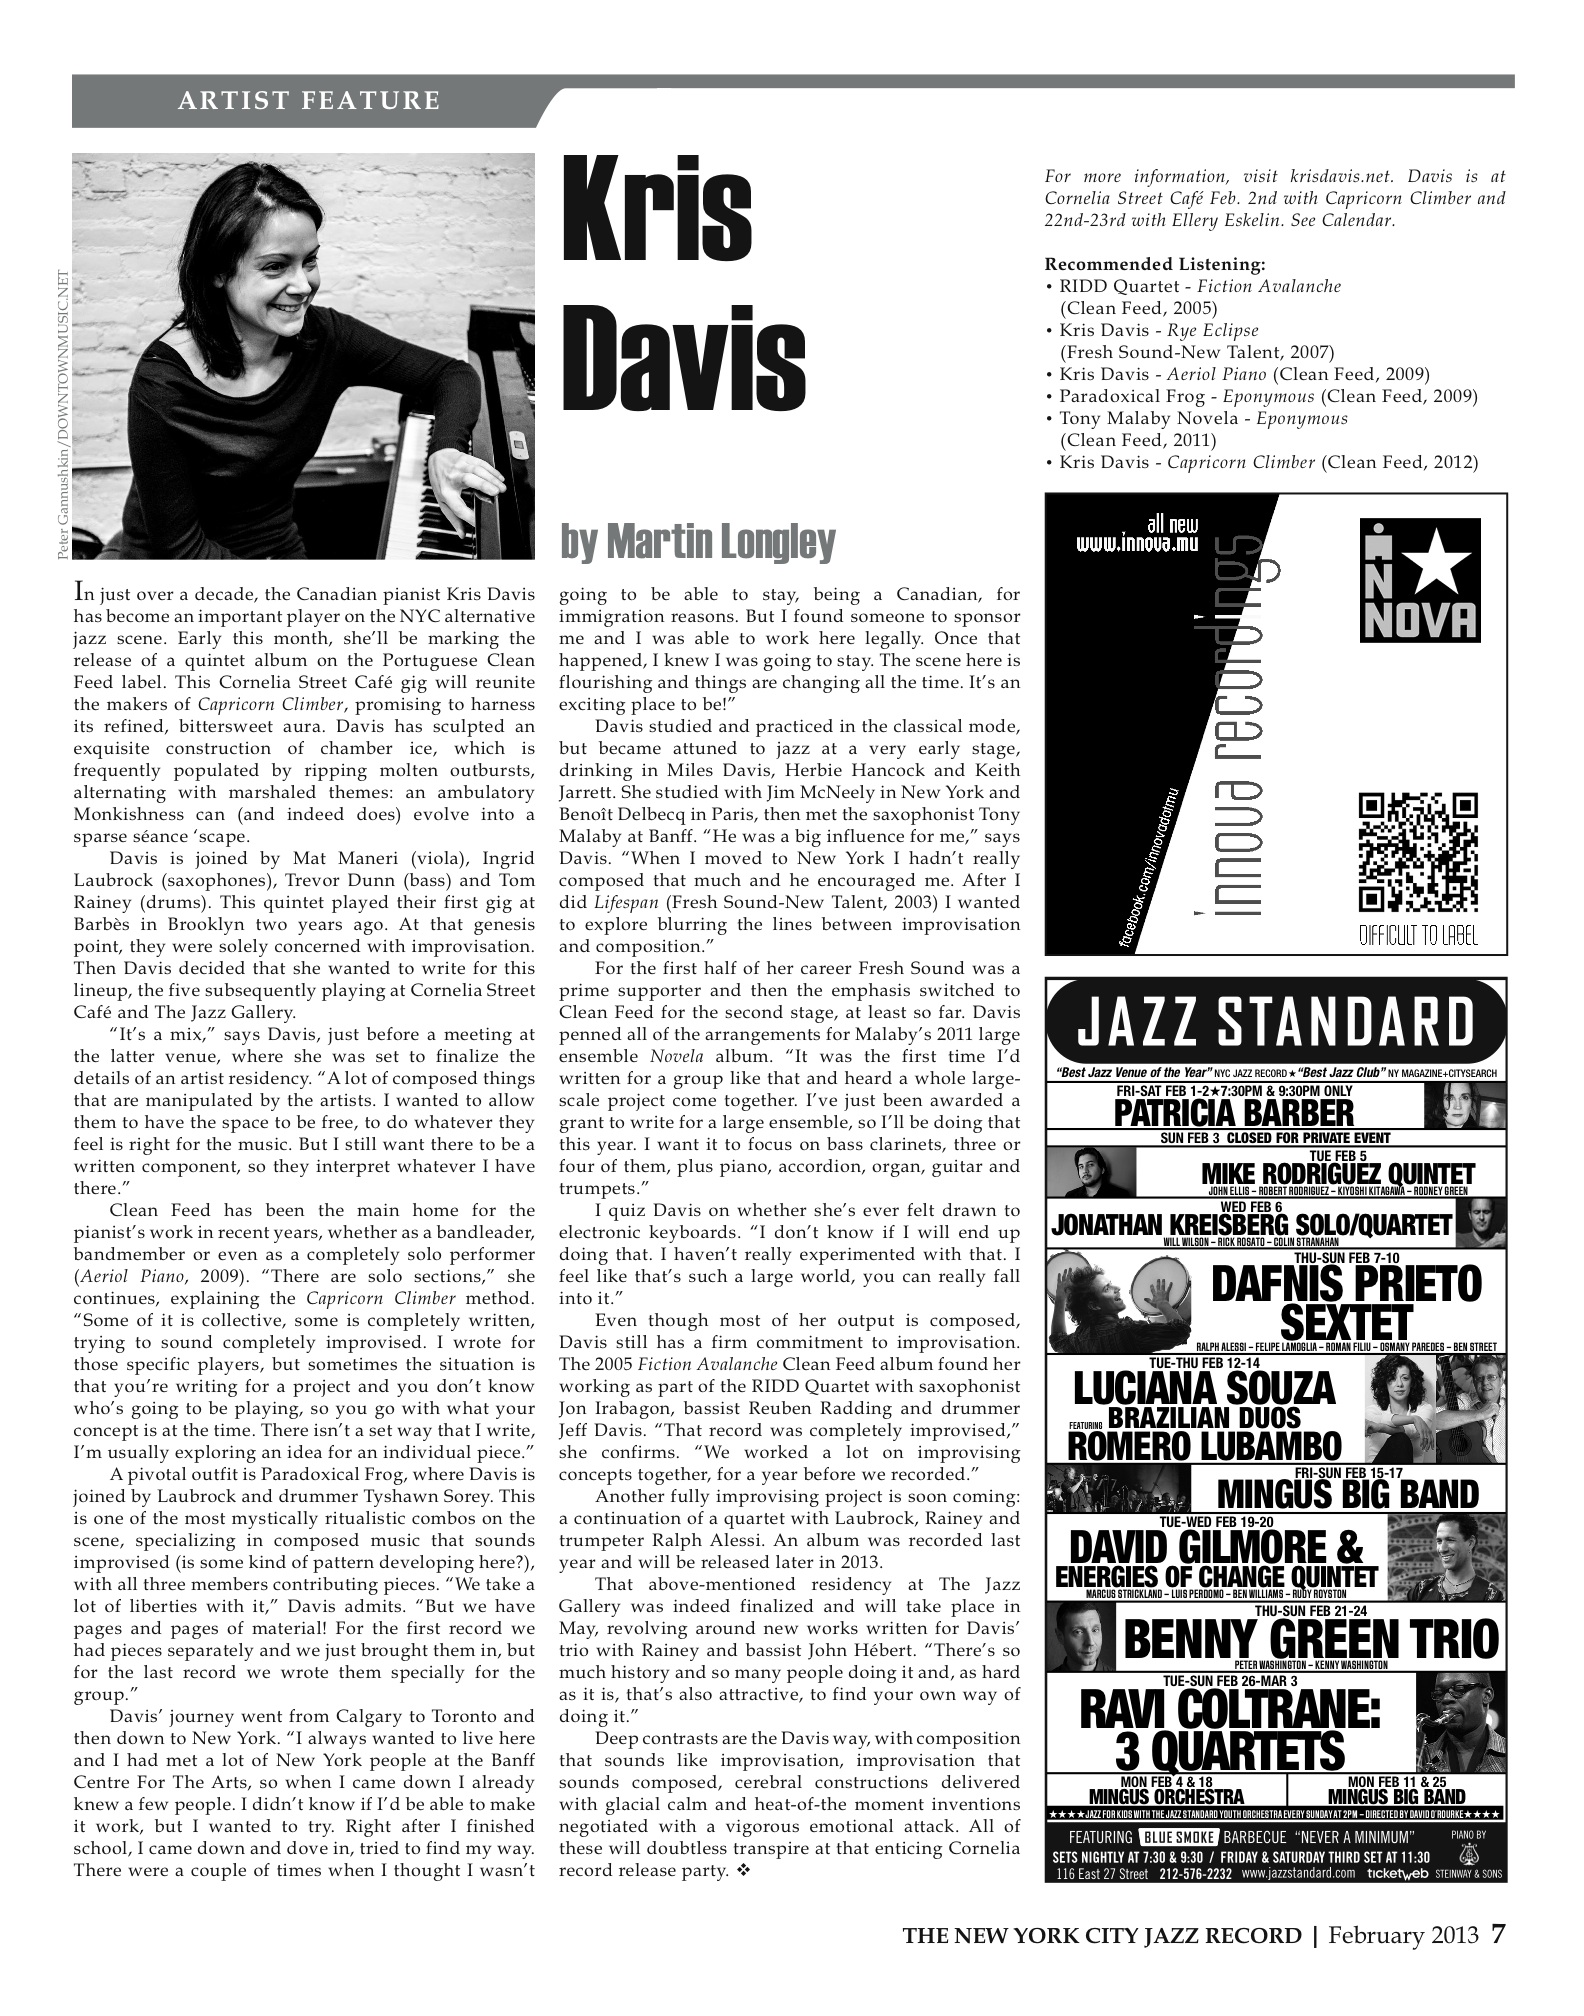 Feature in the New York Jazz Record this month